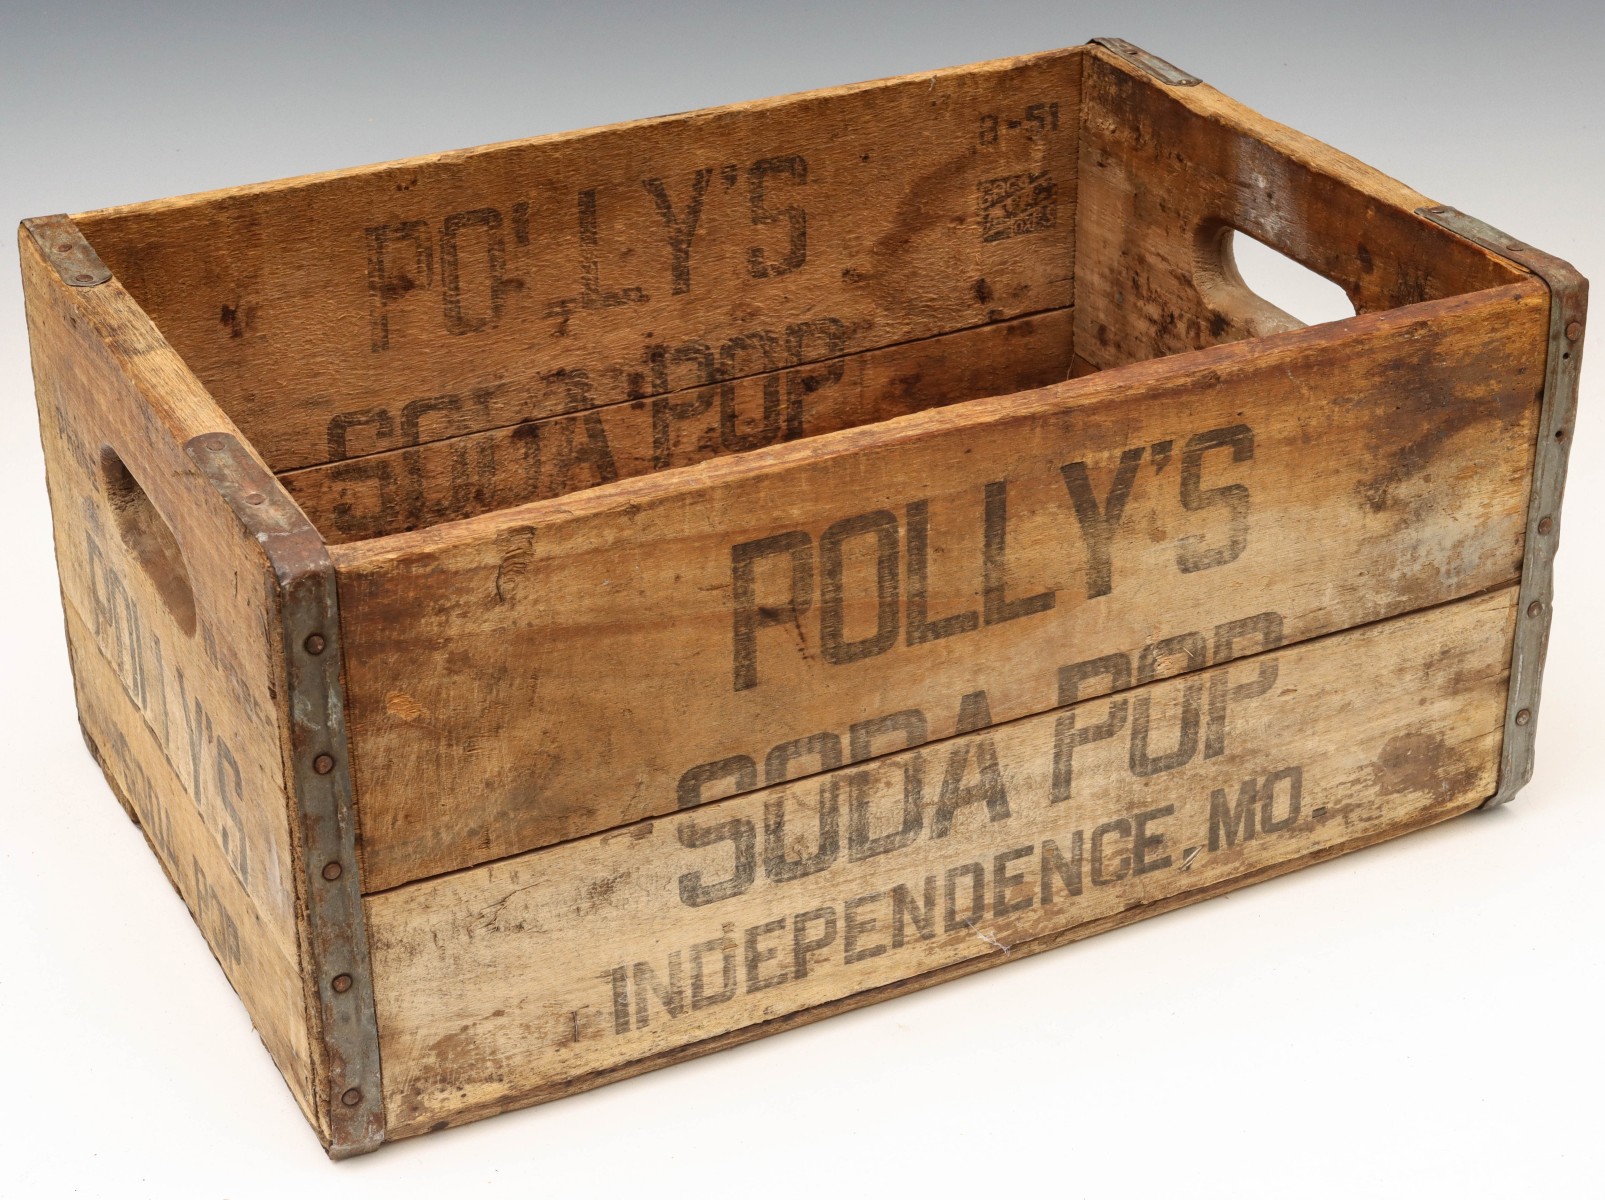 A POLLY'S POP WOODEN ADVERTISING CRATE